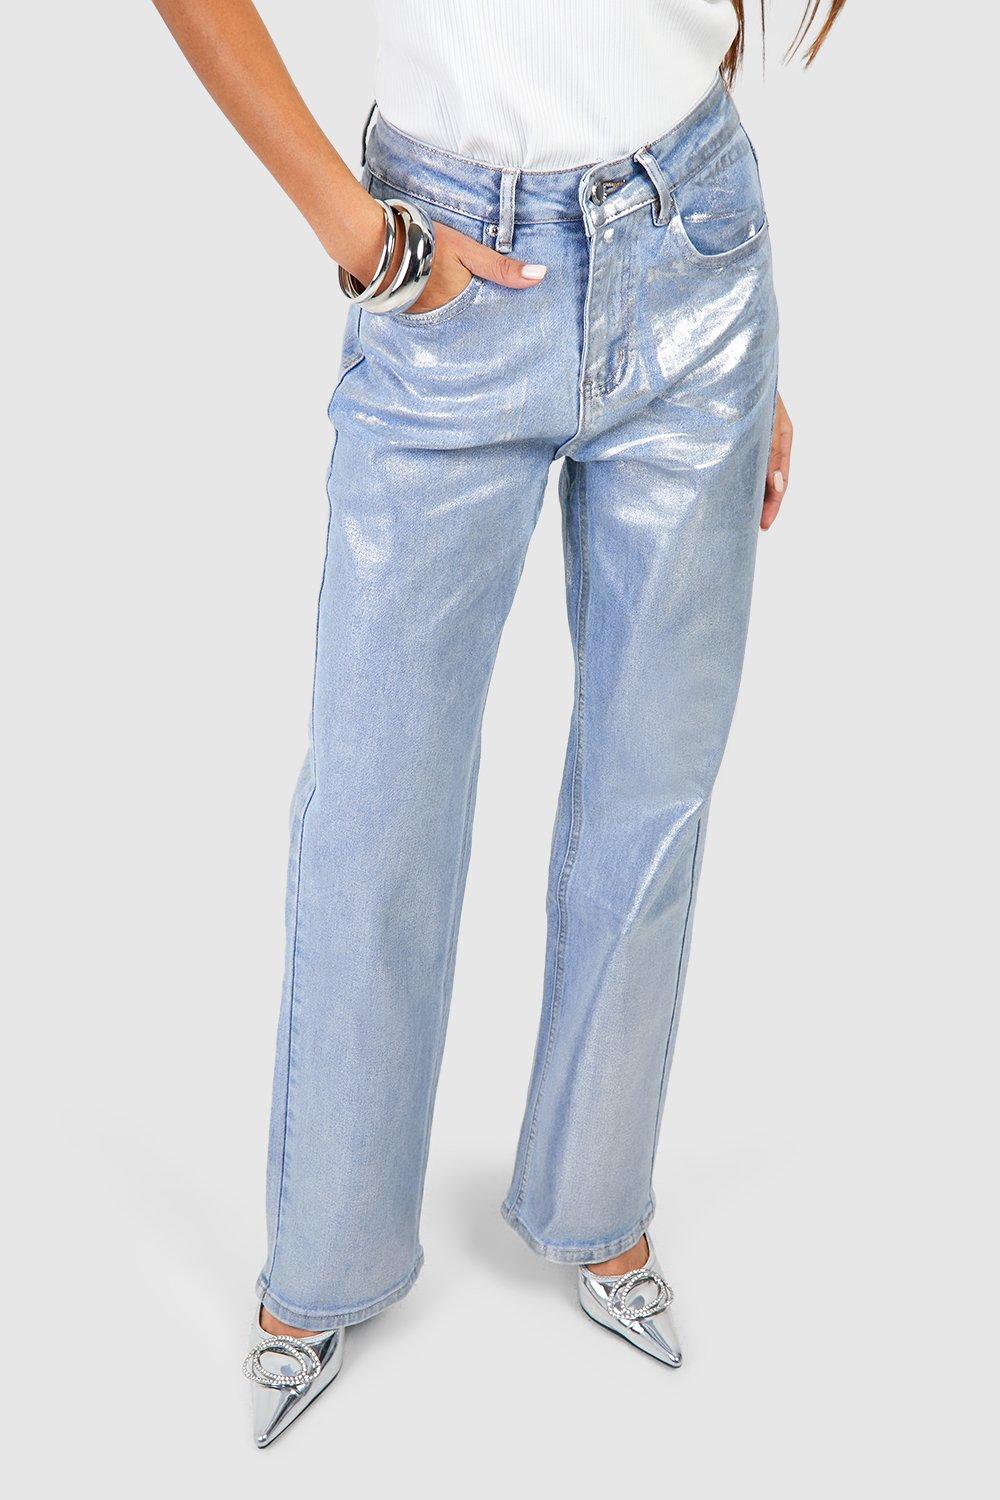 Silver Coated Metallic Jeans